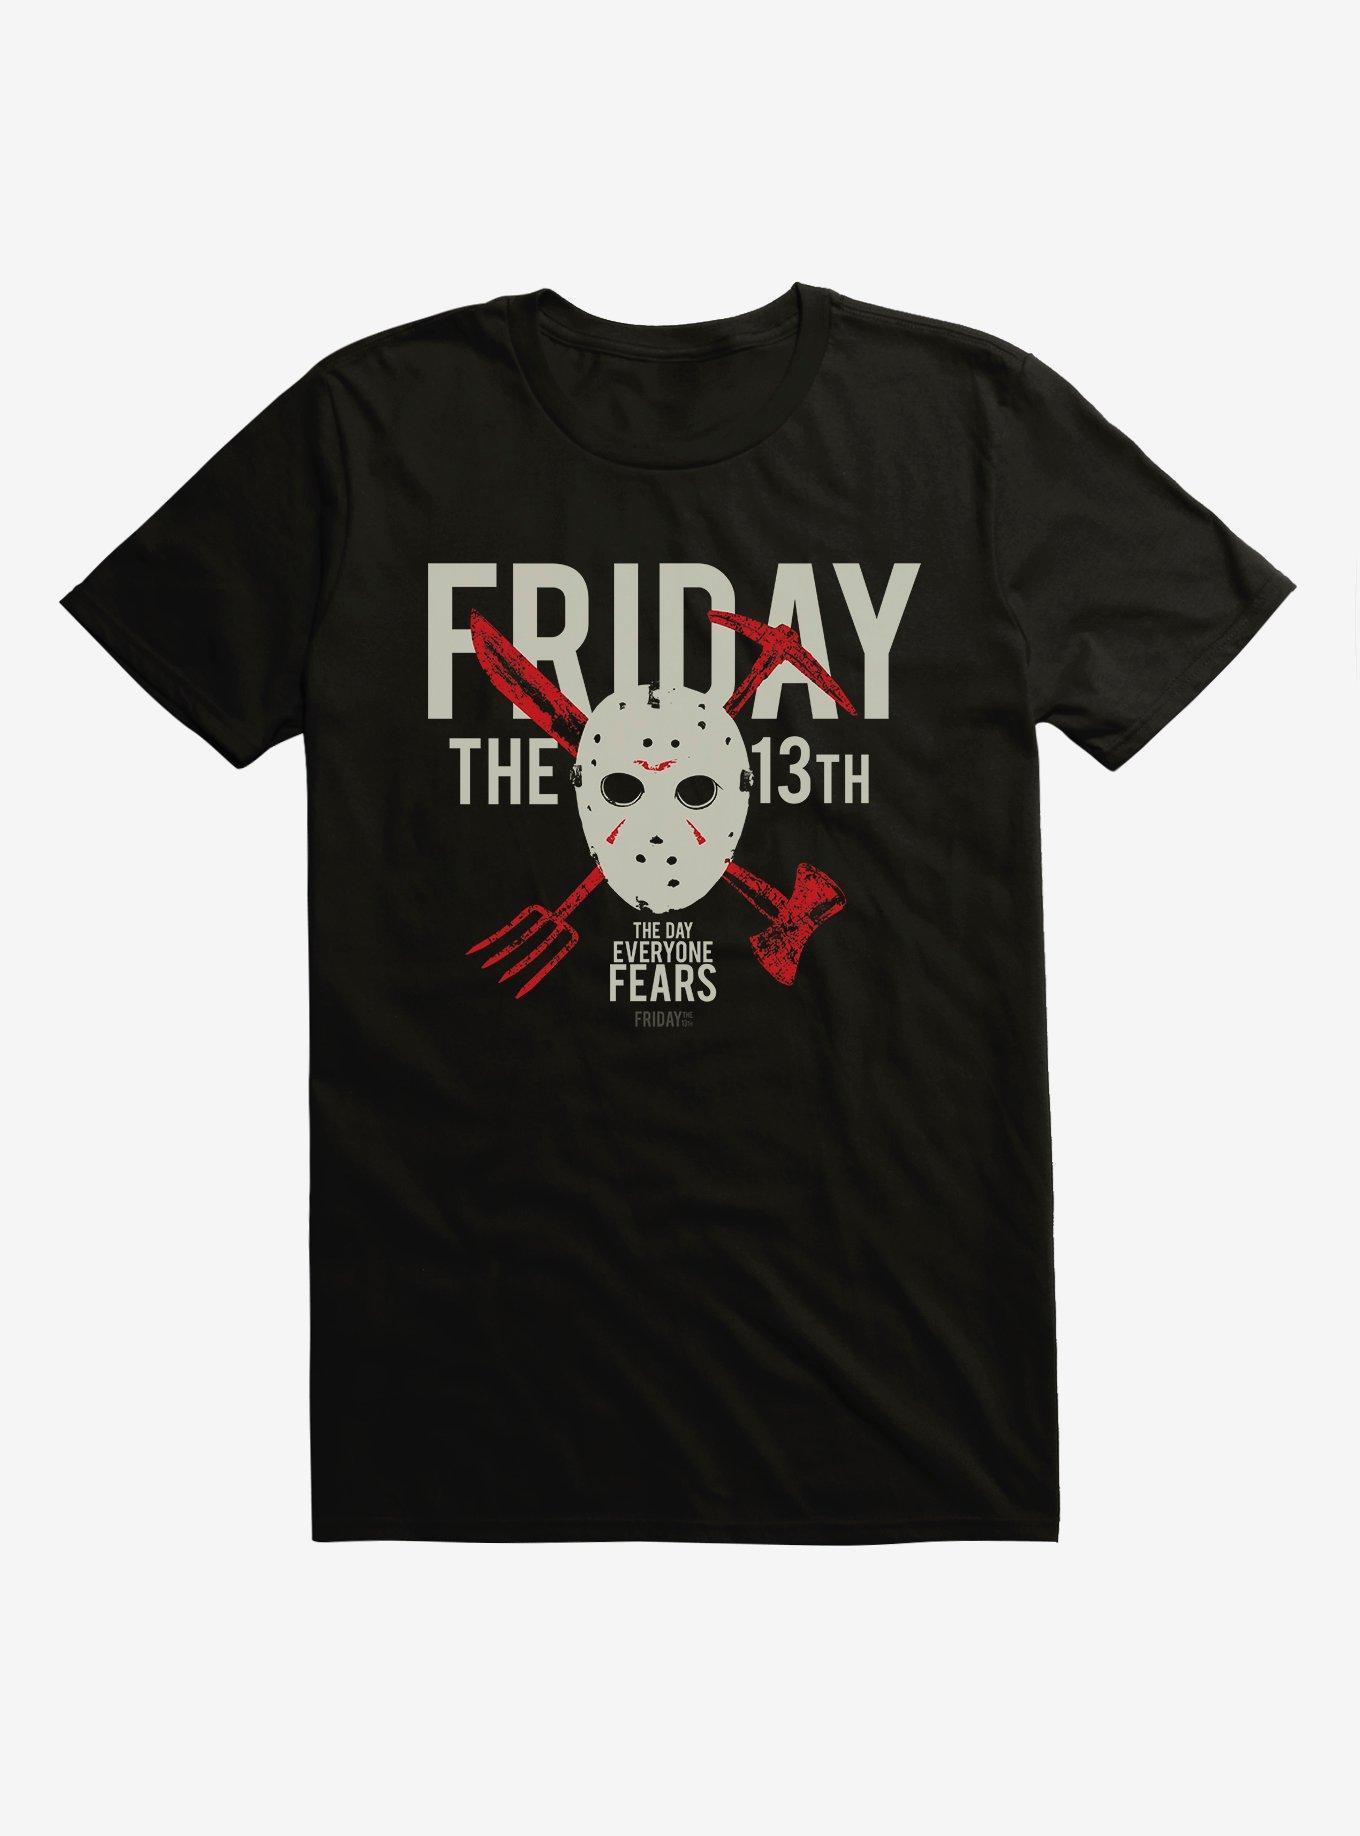 Friday The 13th Everyone Fears T-Shirt, , hi-res